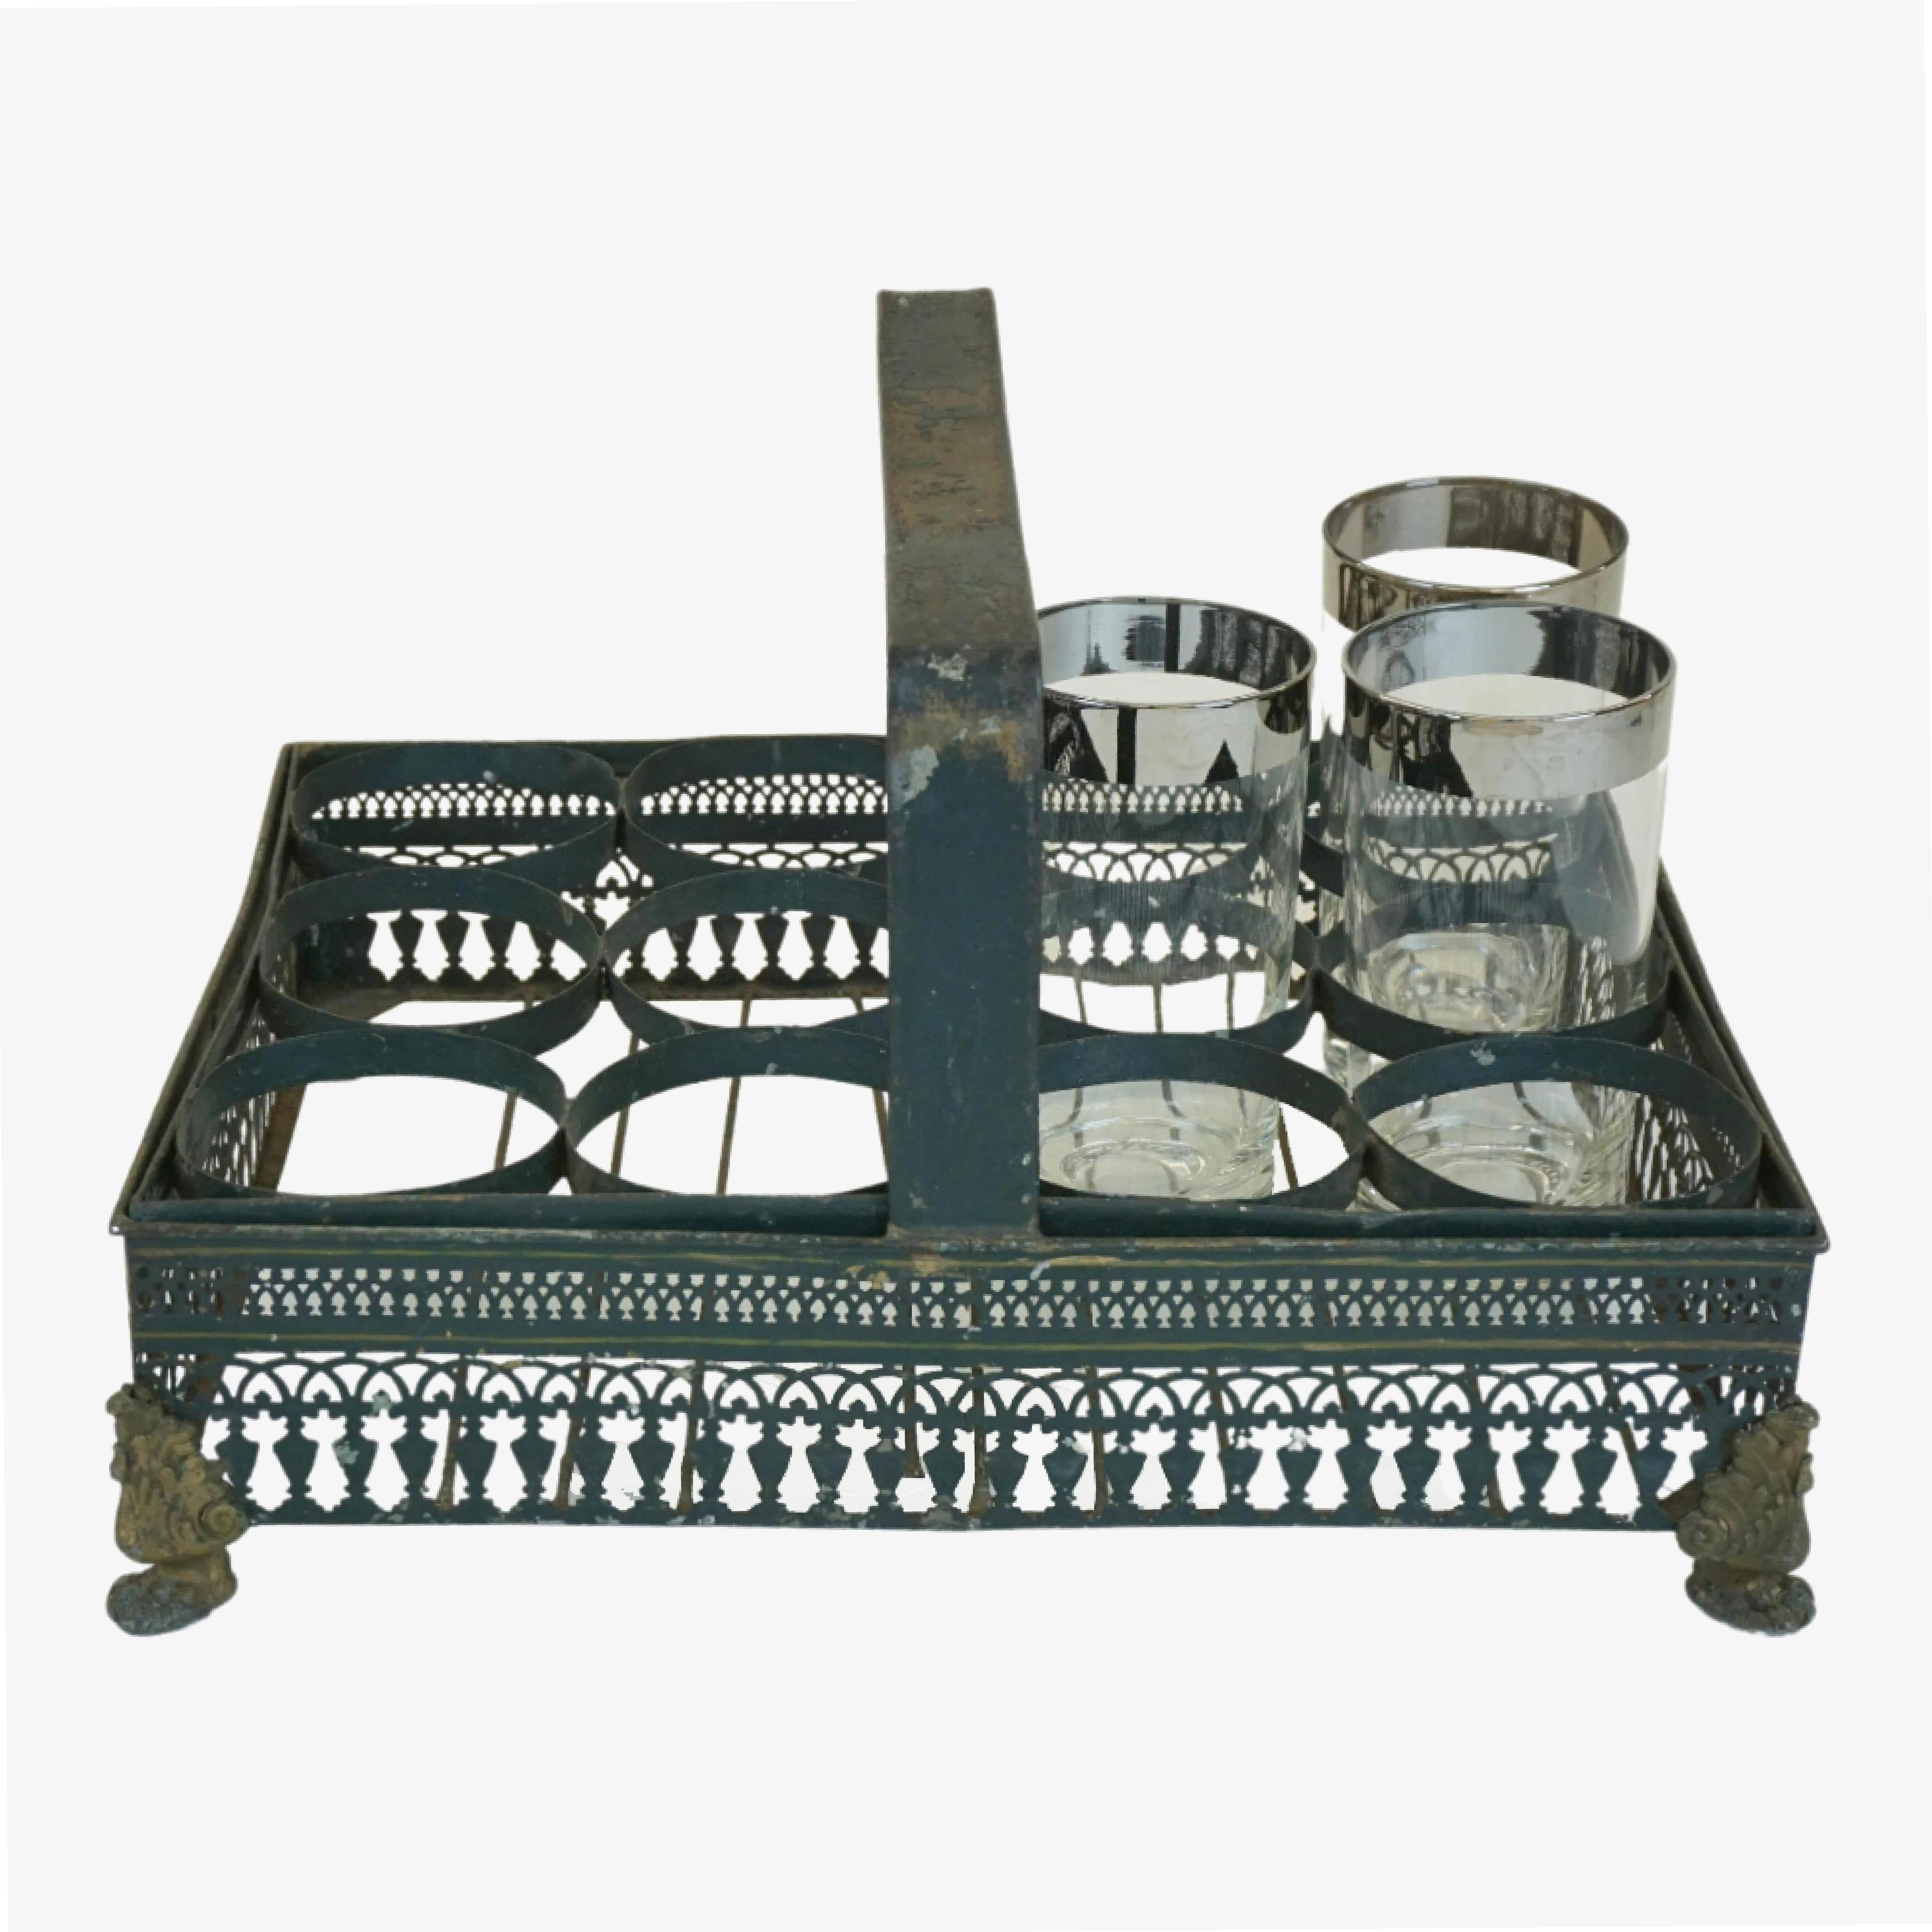 This vintage French drink caddy with handle holds 12 glasses and displays beautifully indoors or outdoors. Design features ornate metal feet that elevate the tray. The metalware is in good condition with occasional sign of wear from age. Glassware